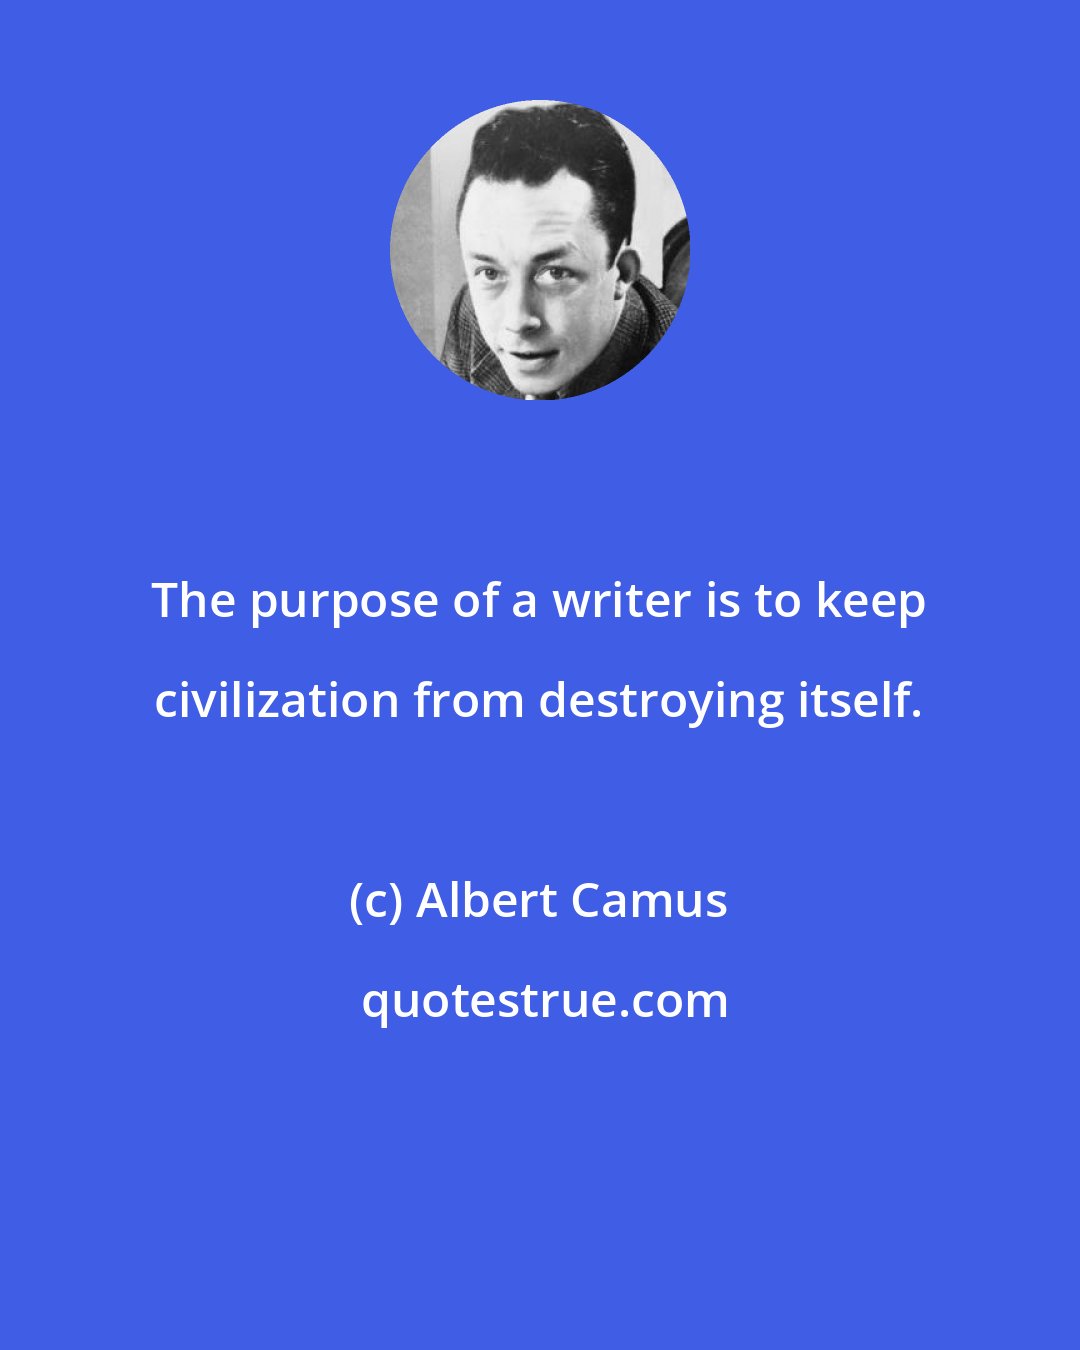 Albert Camus: The purpose of a writer is to keep civilization from destroying itself.